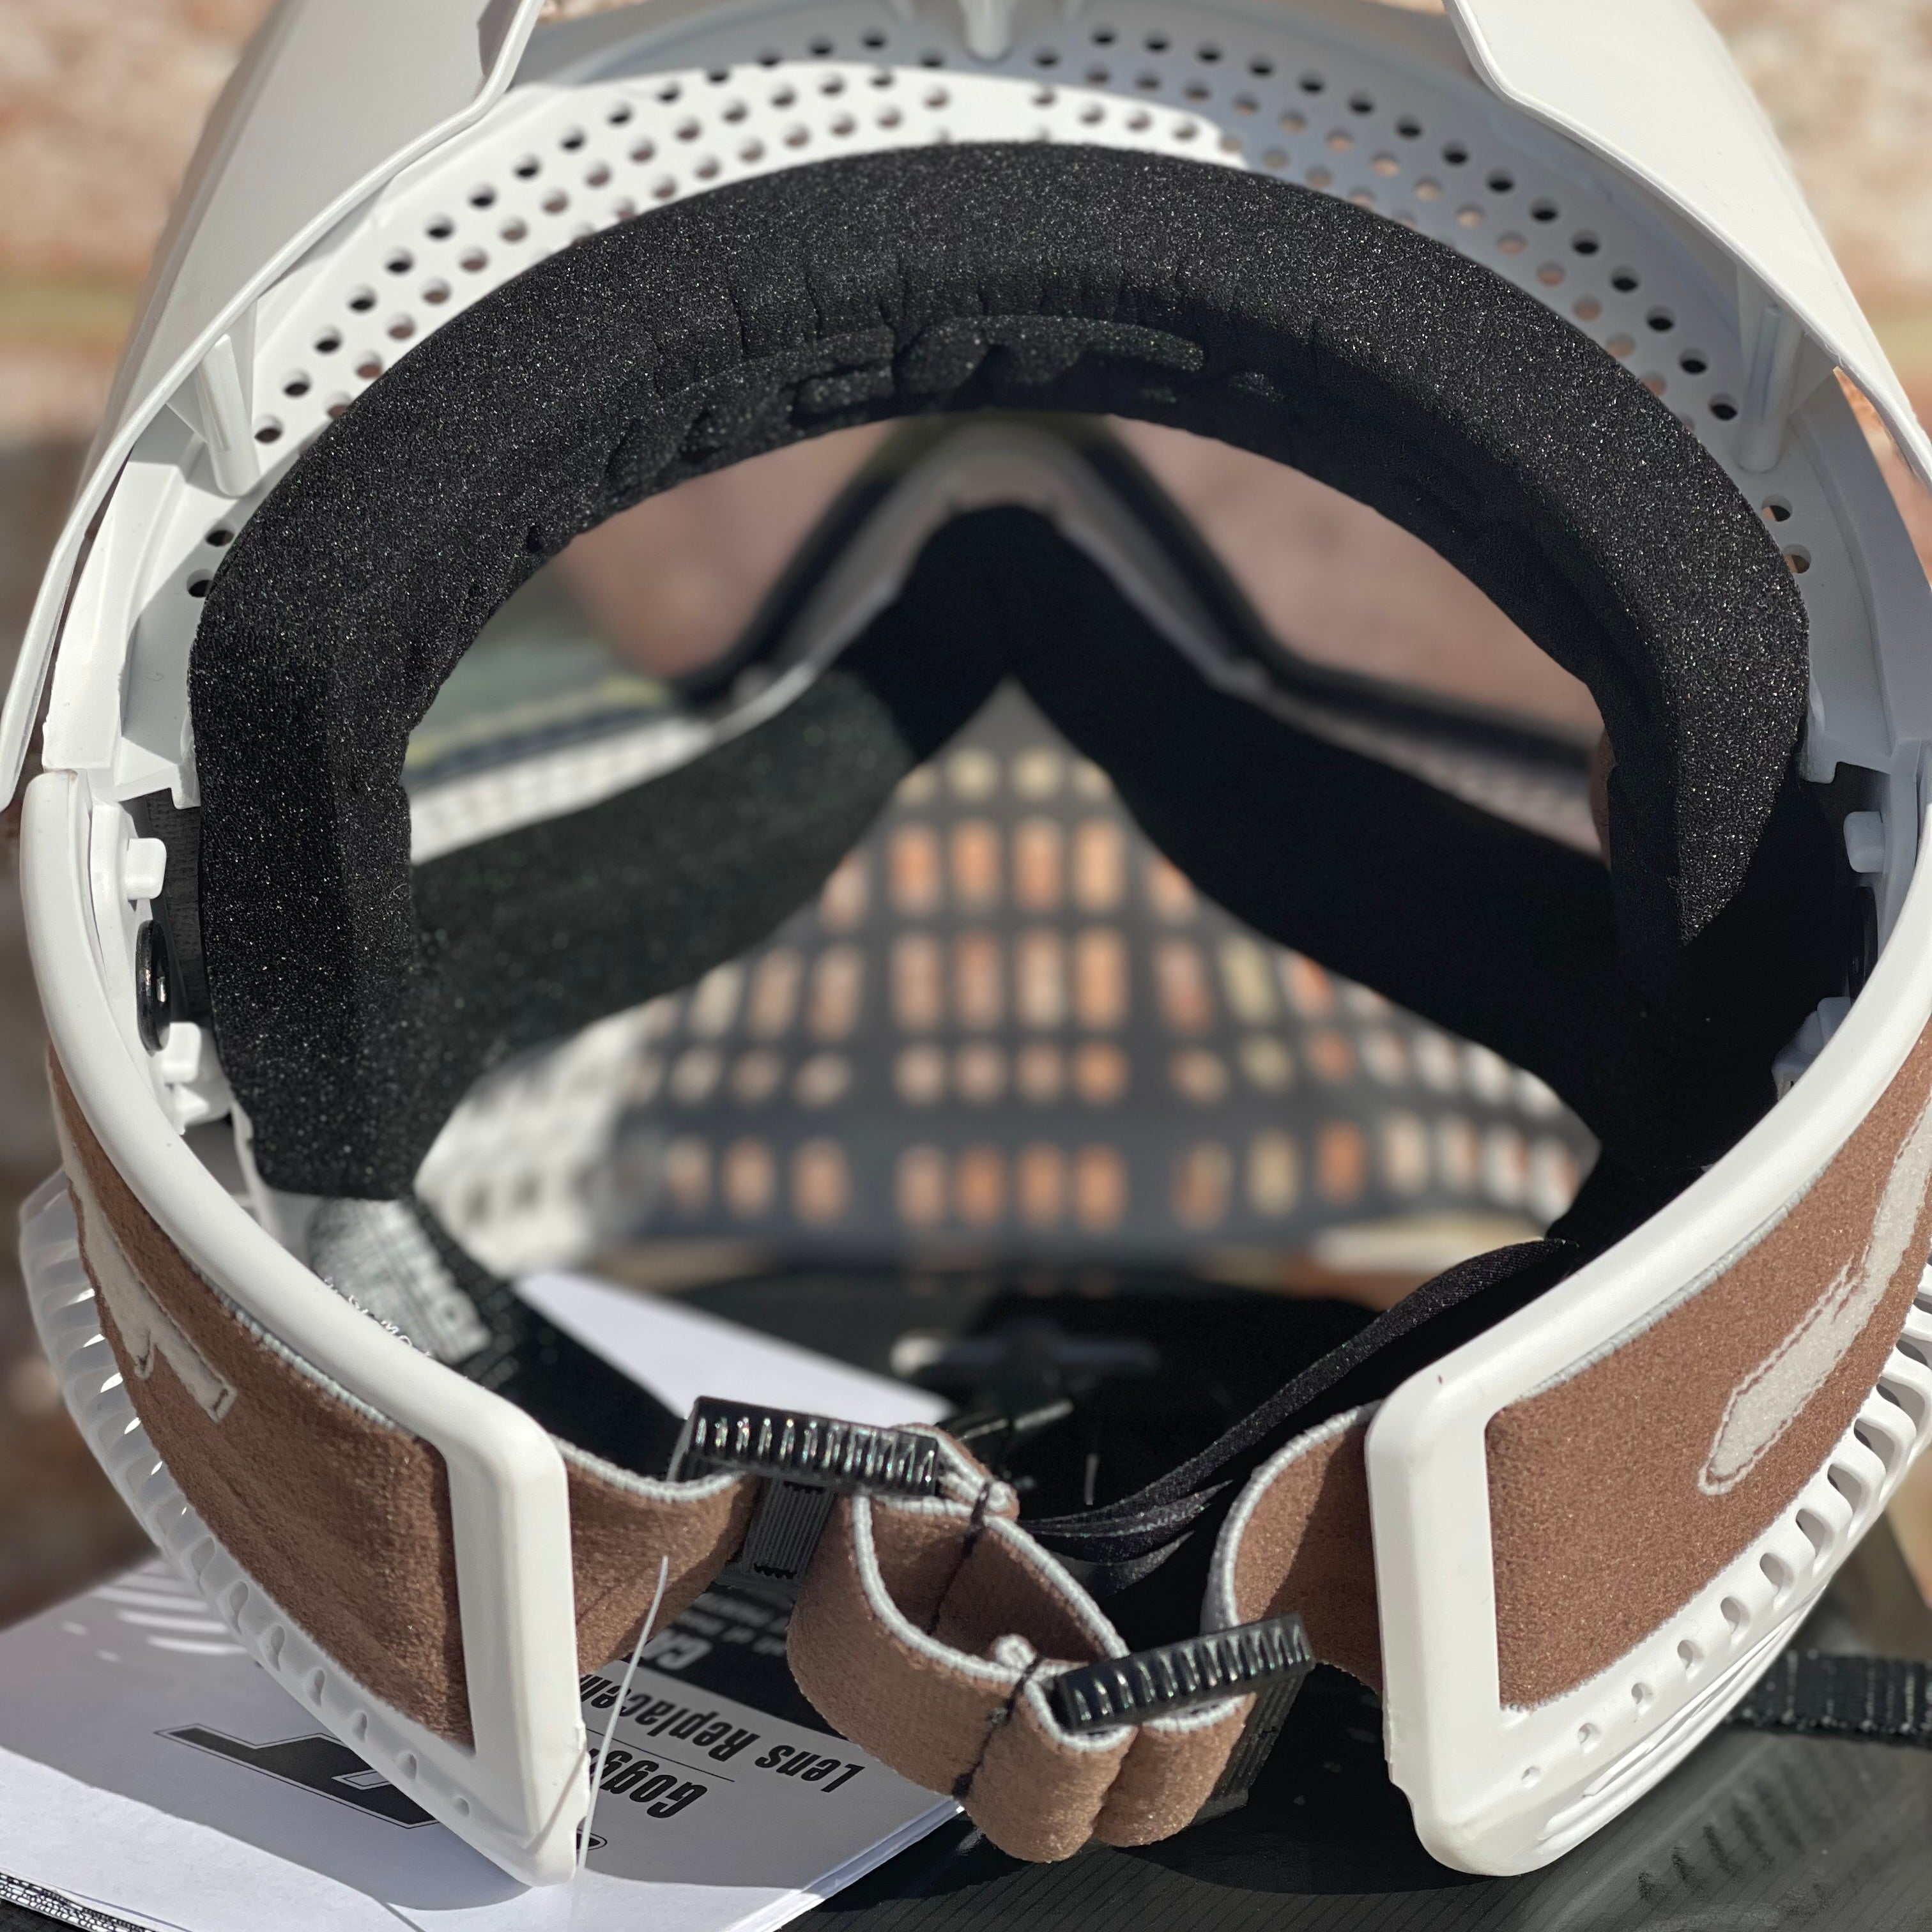 Used JT Proflex Paintball Mask - LE White w/Goggle Bag